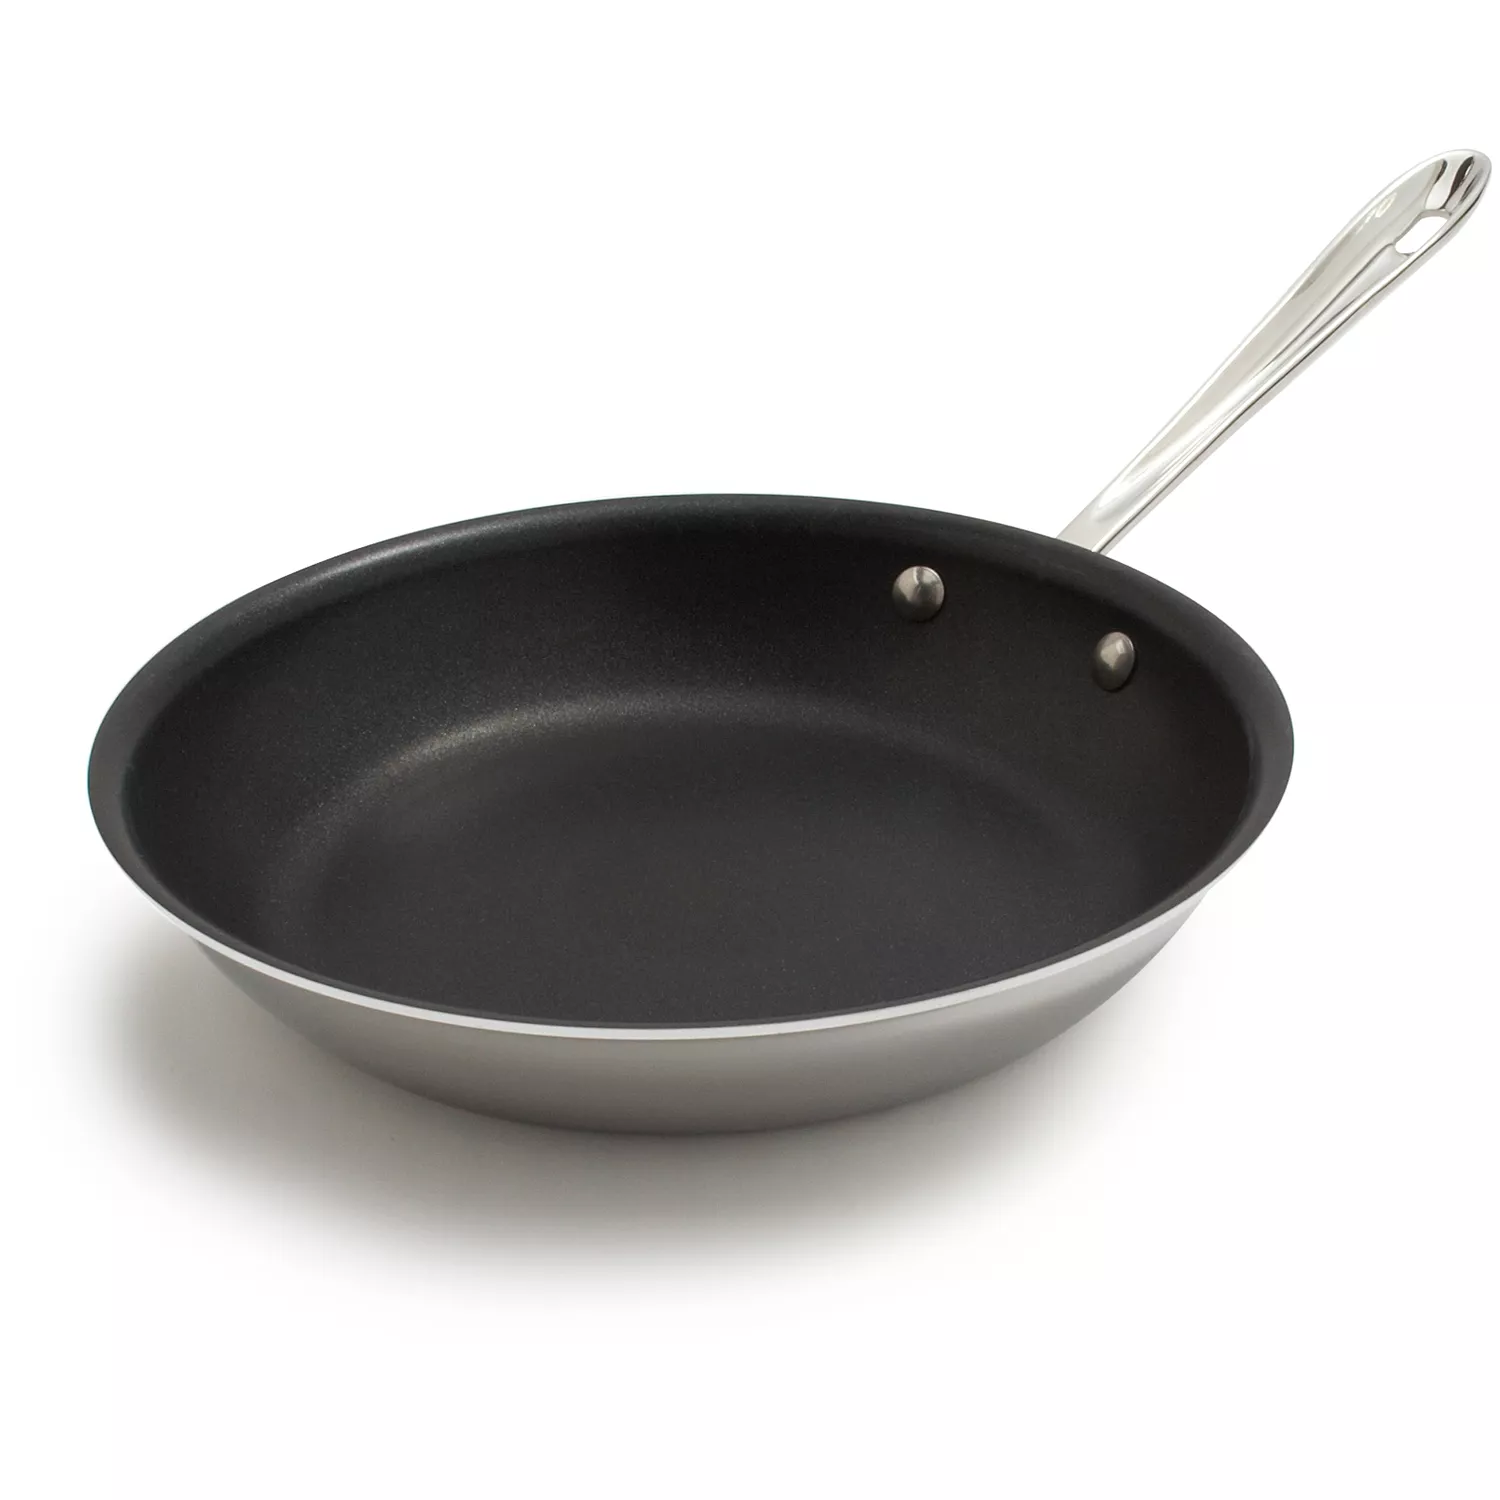 All-Clad D3 Tri-Ply Stainless-Steel Nonstick Frying Pan